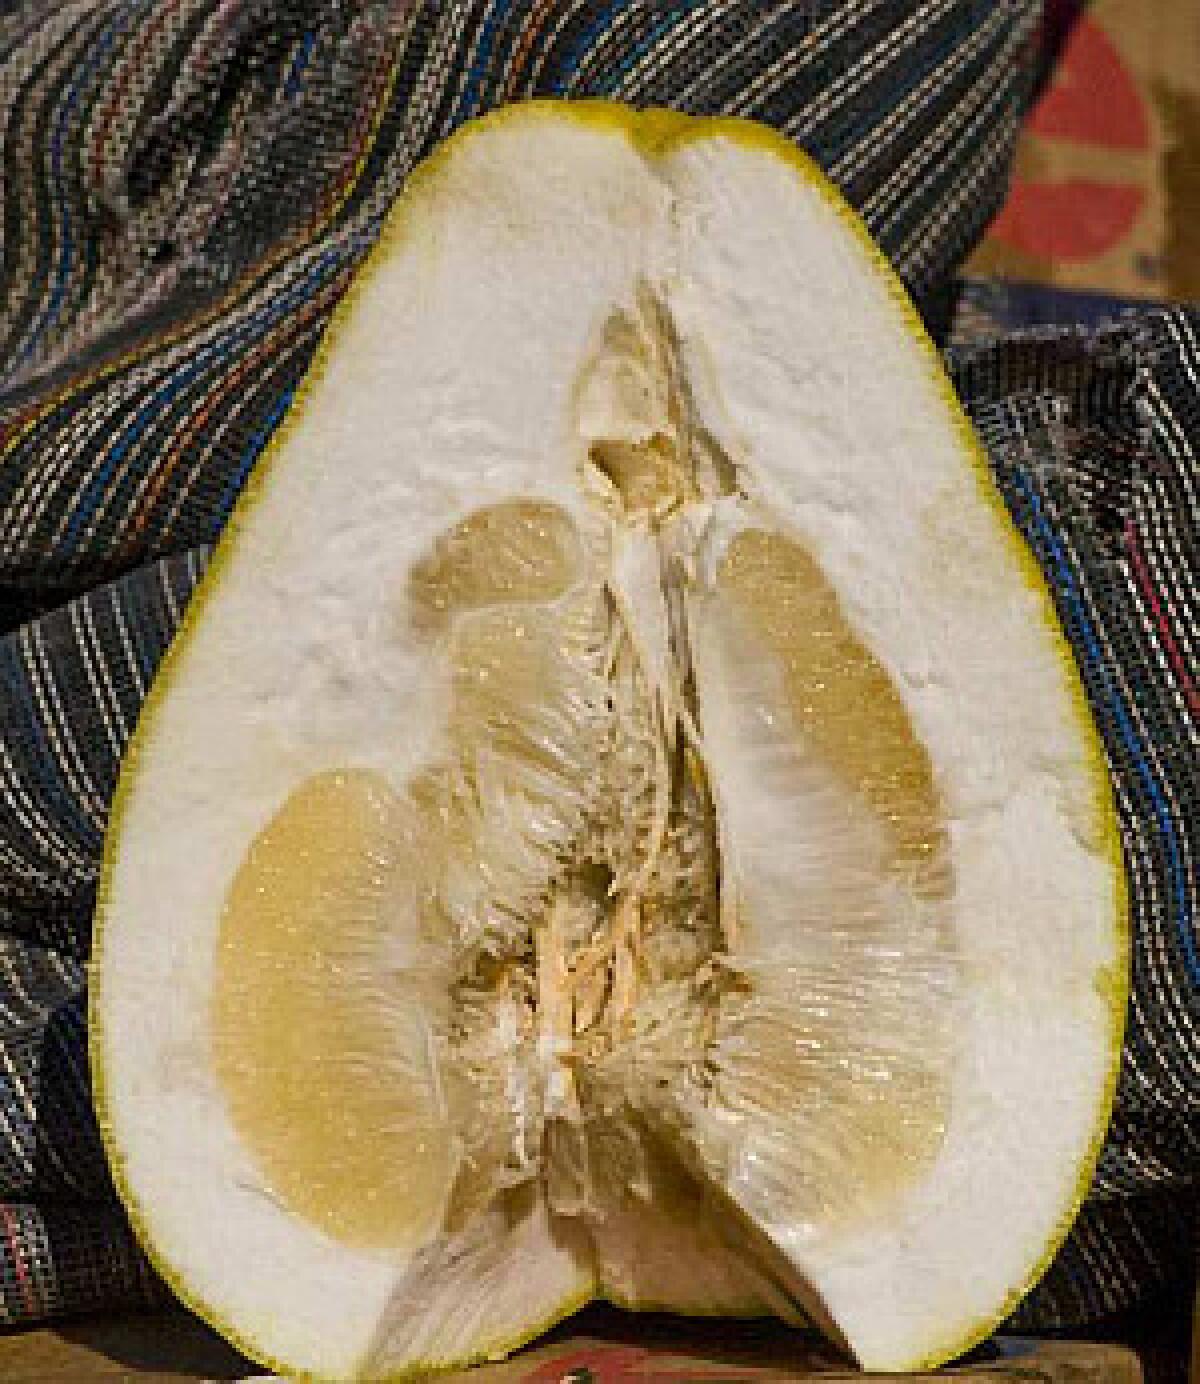 Compared with a grapefruit, a pummelo is larger and has a much thicker rind and somewhat drier, milder pulp.